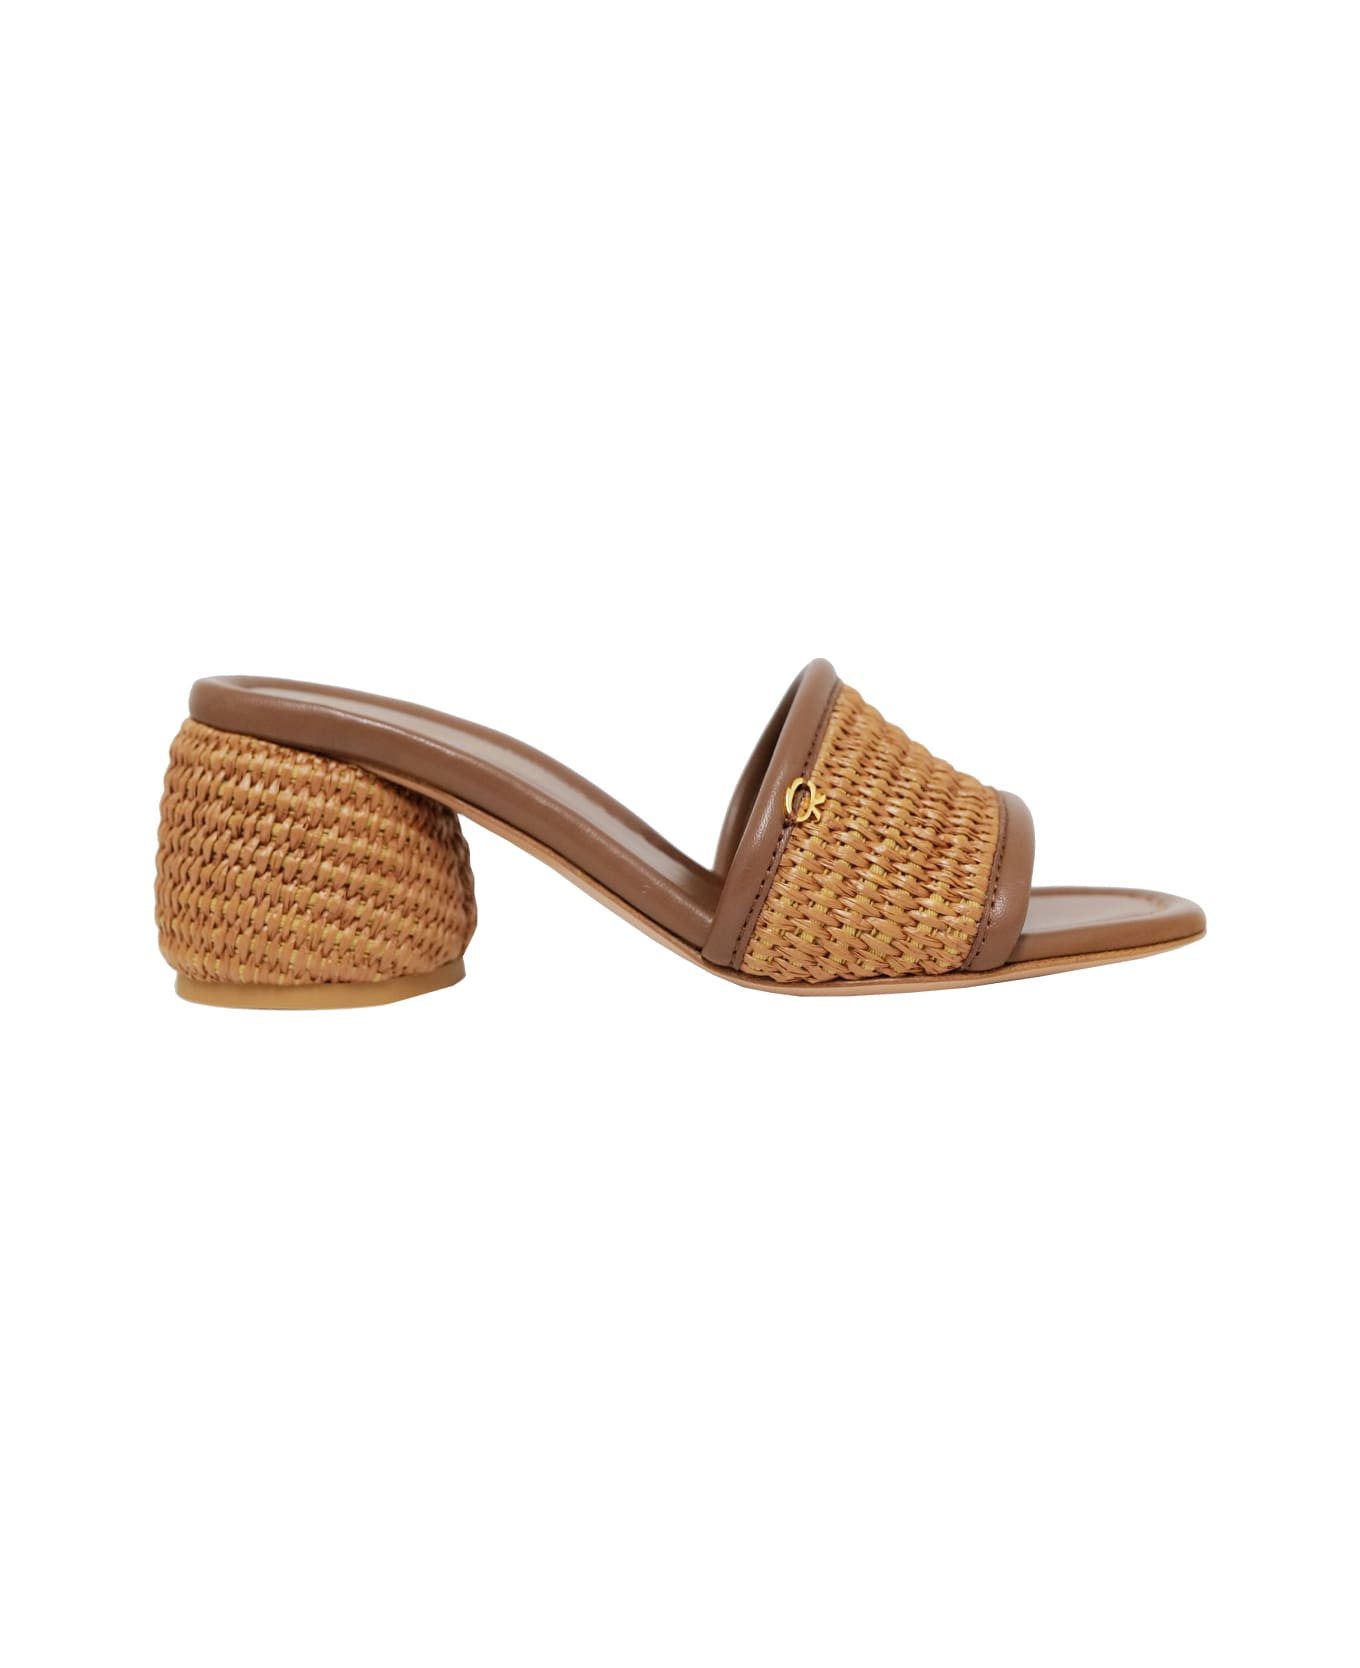 Gianvito Rossi ''amami60'' Heeled Sandals - Brown